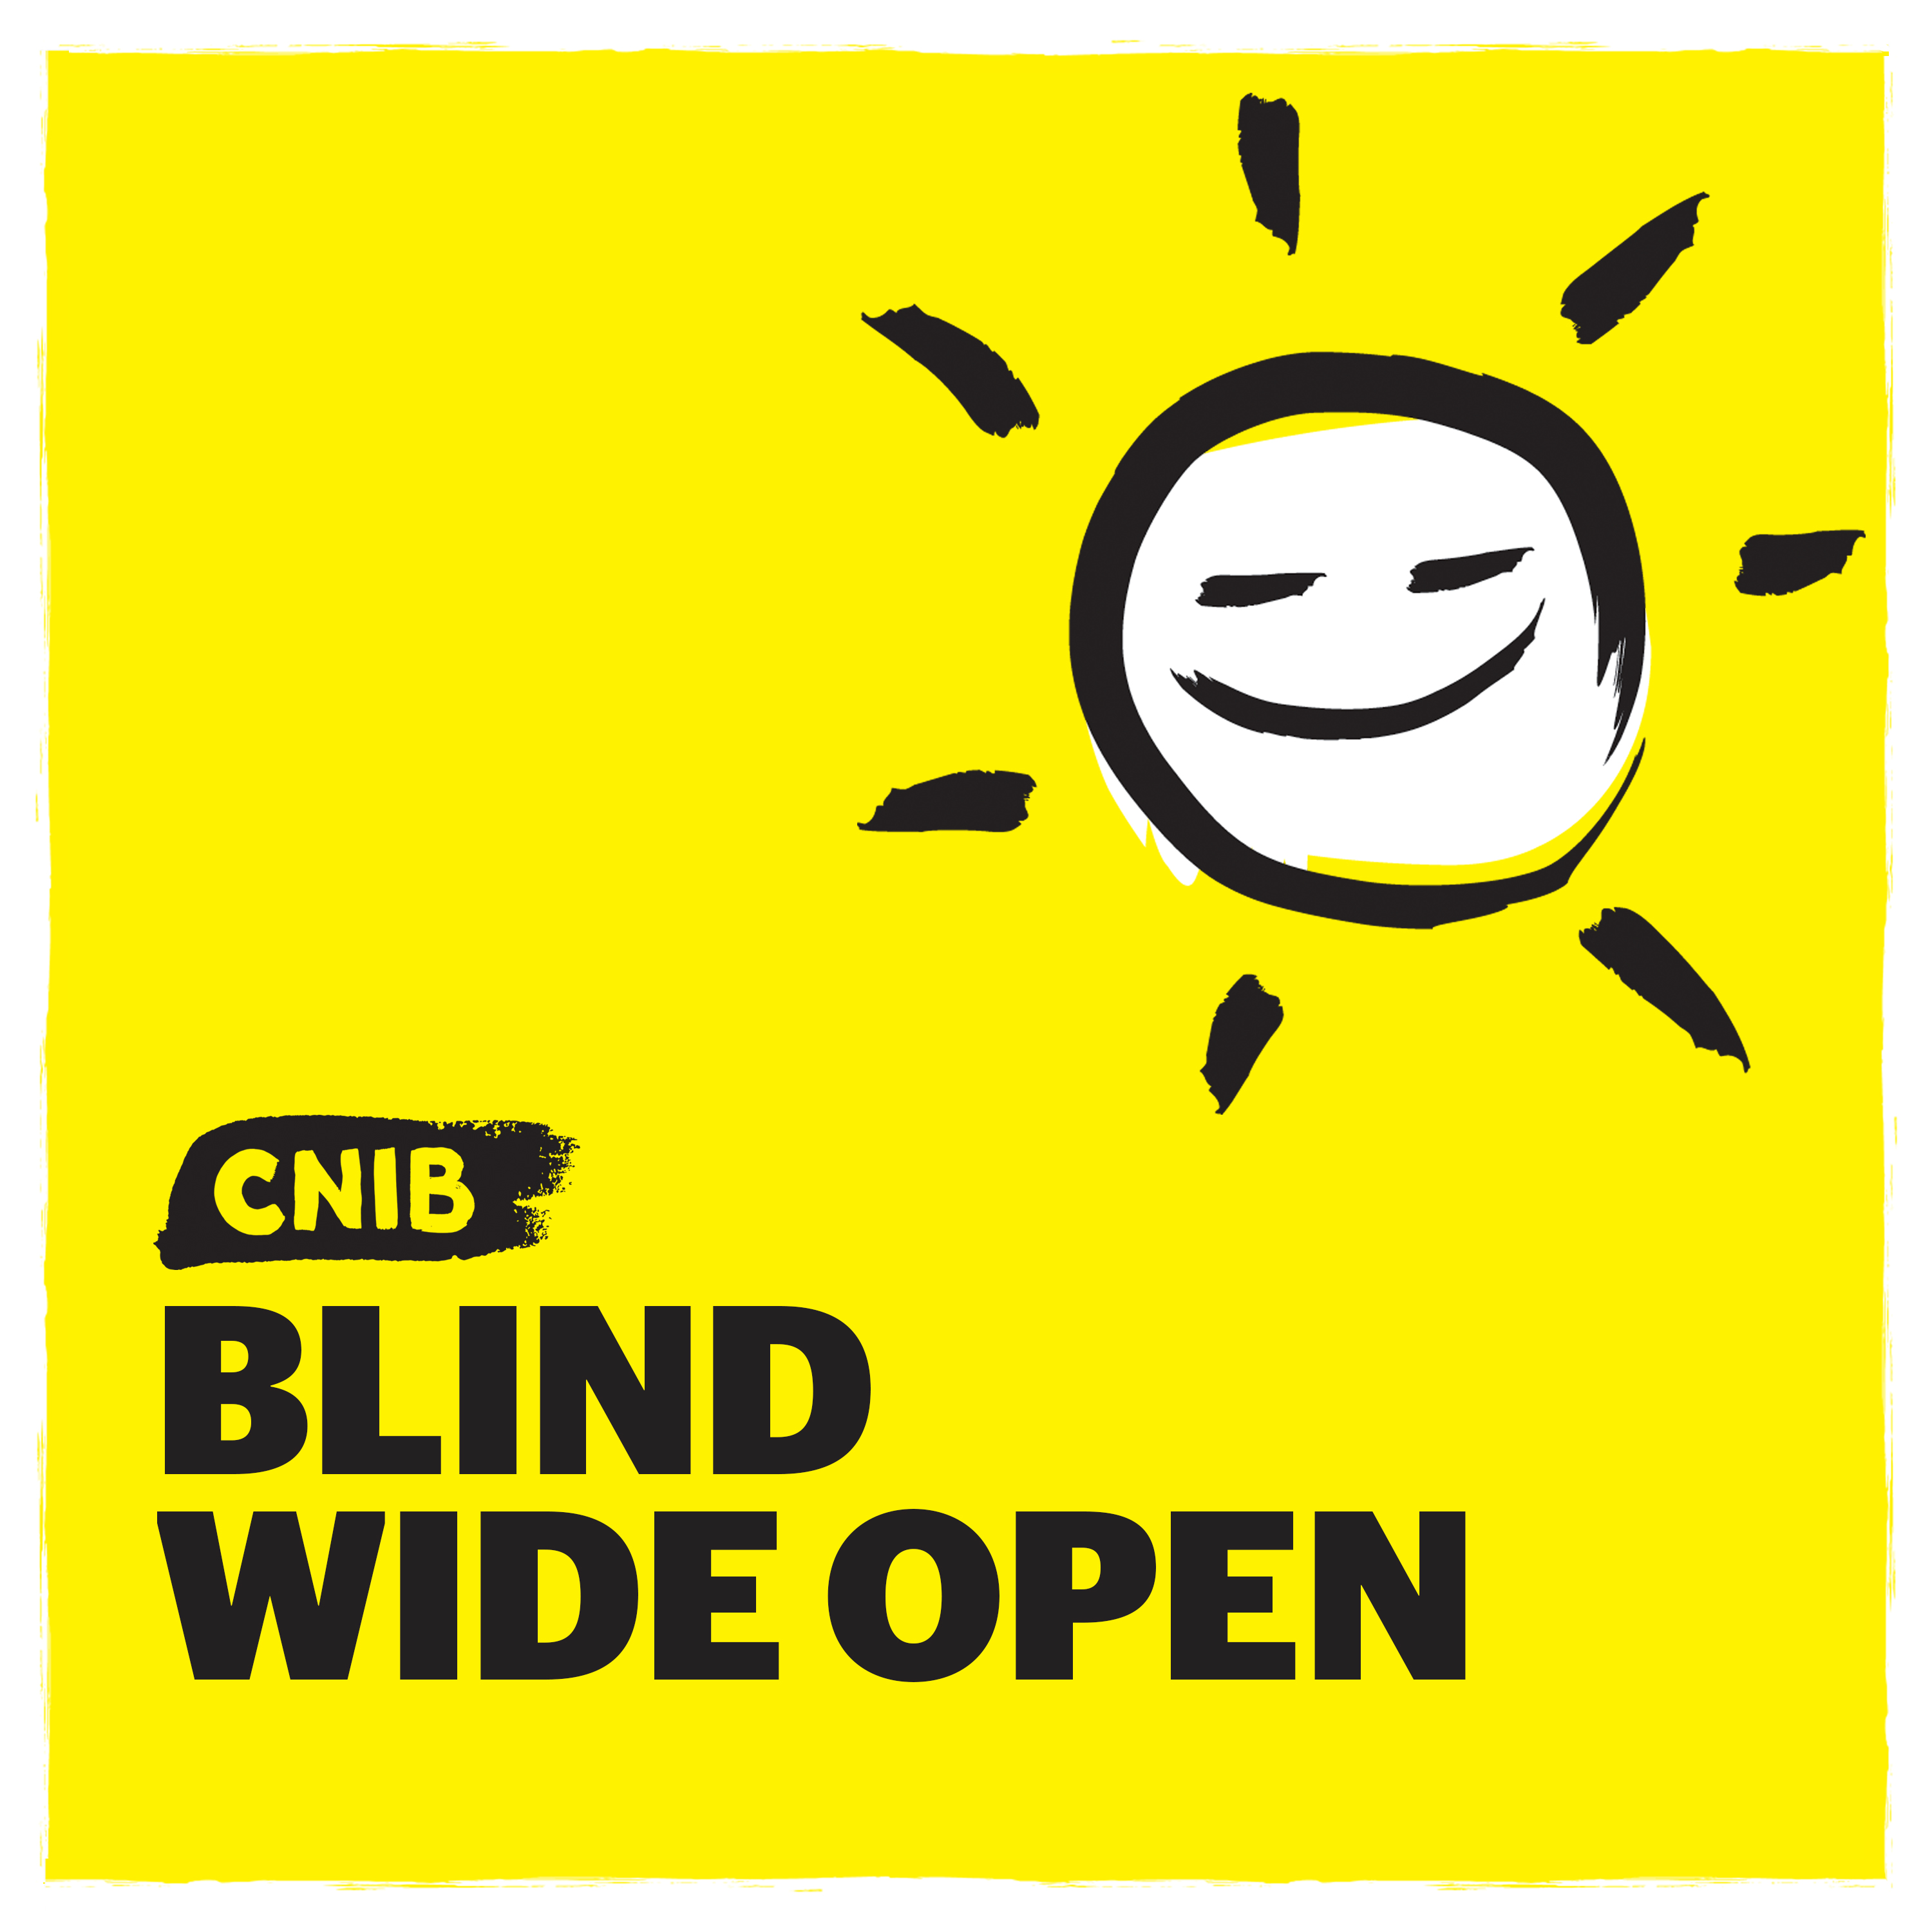 CNIB Blind Wide Open logo. An illustration of a sunshine on a yellow background.